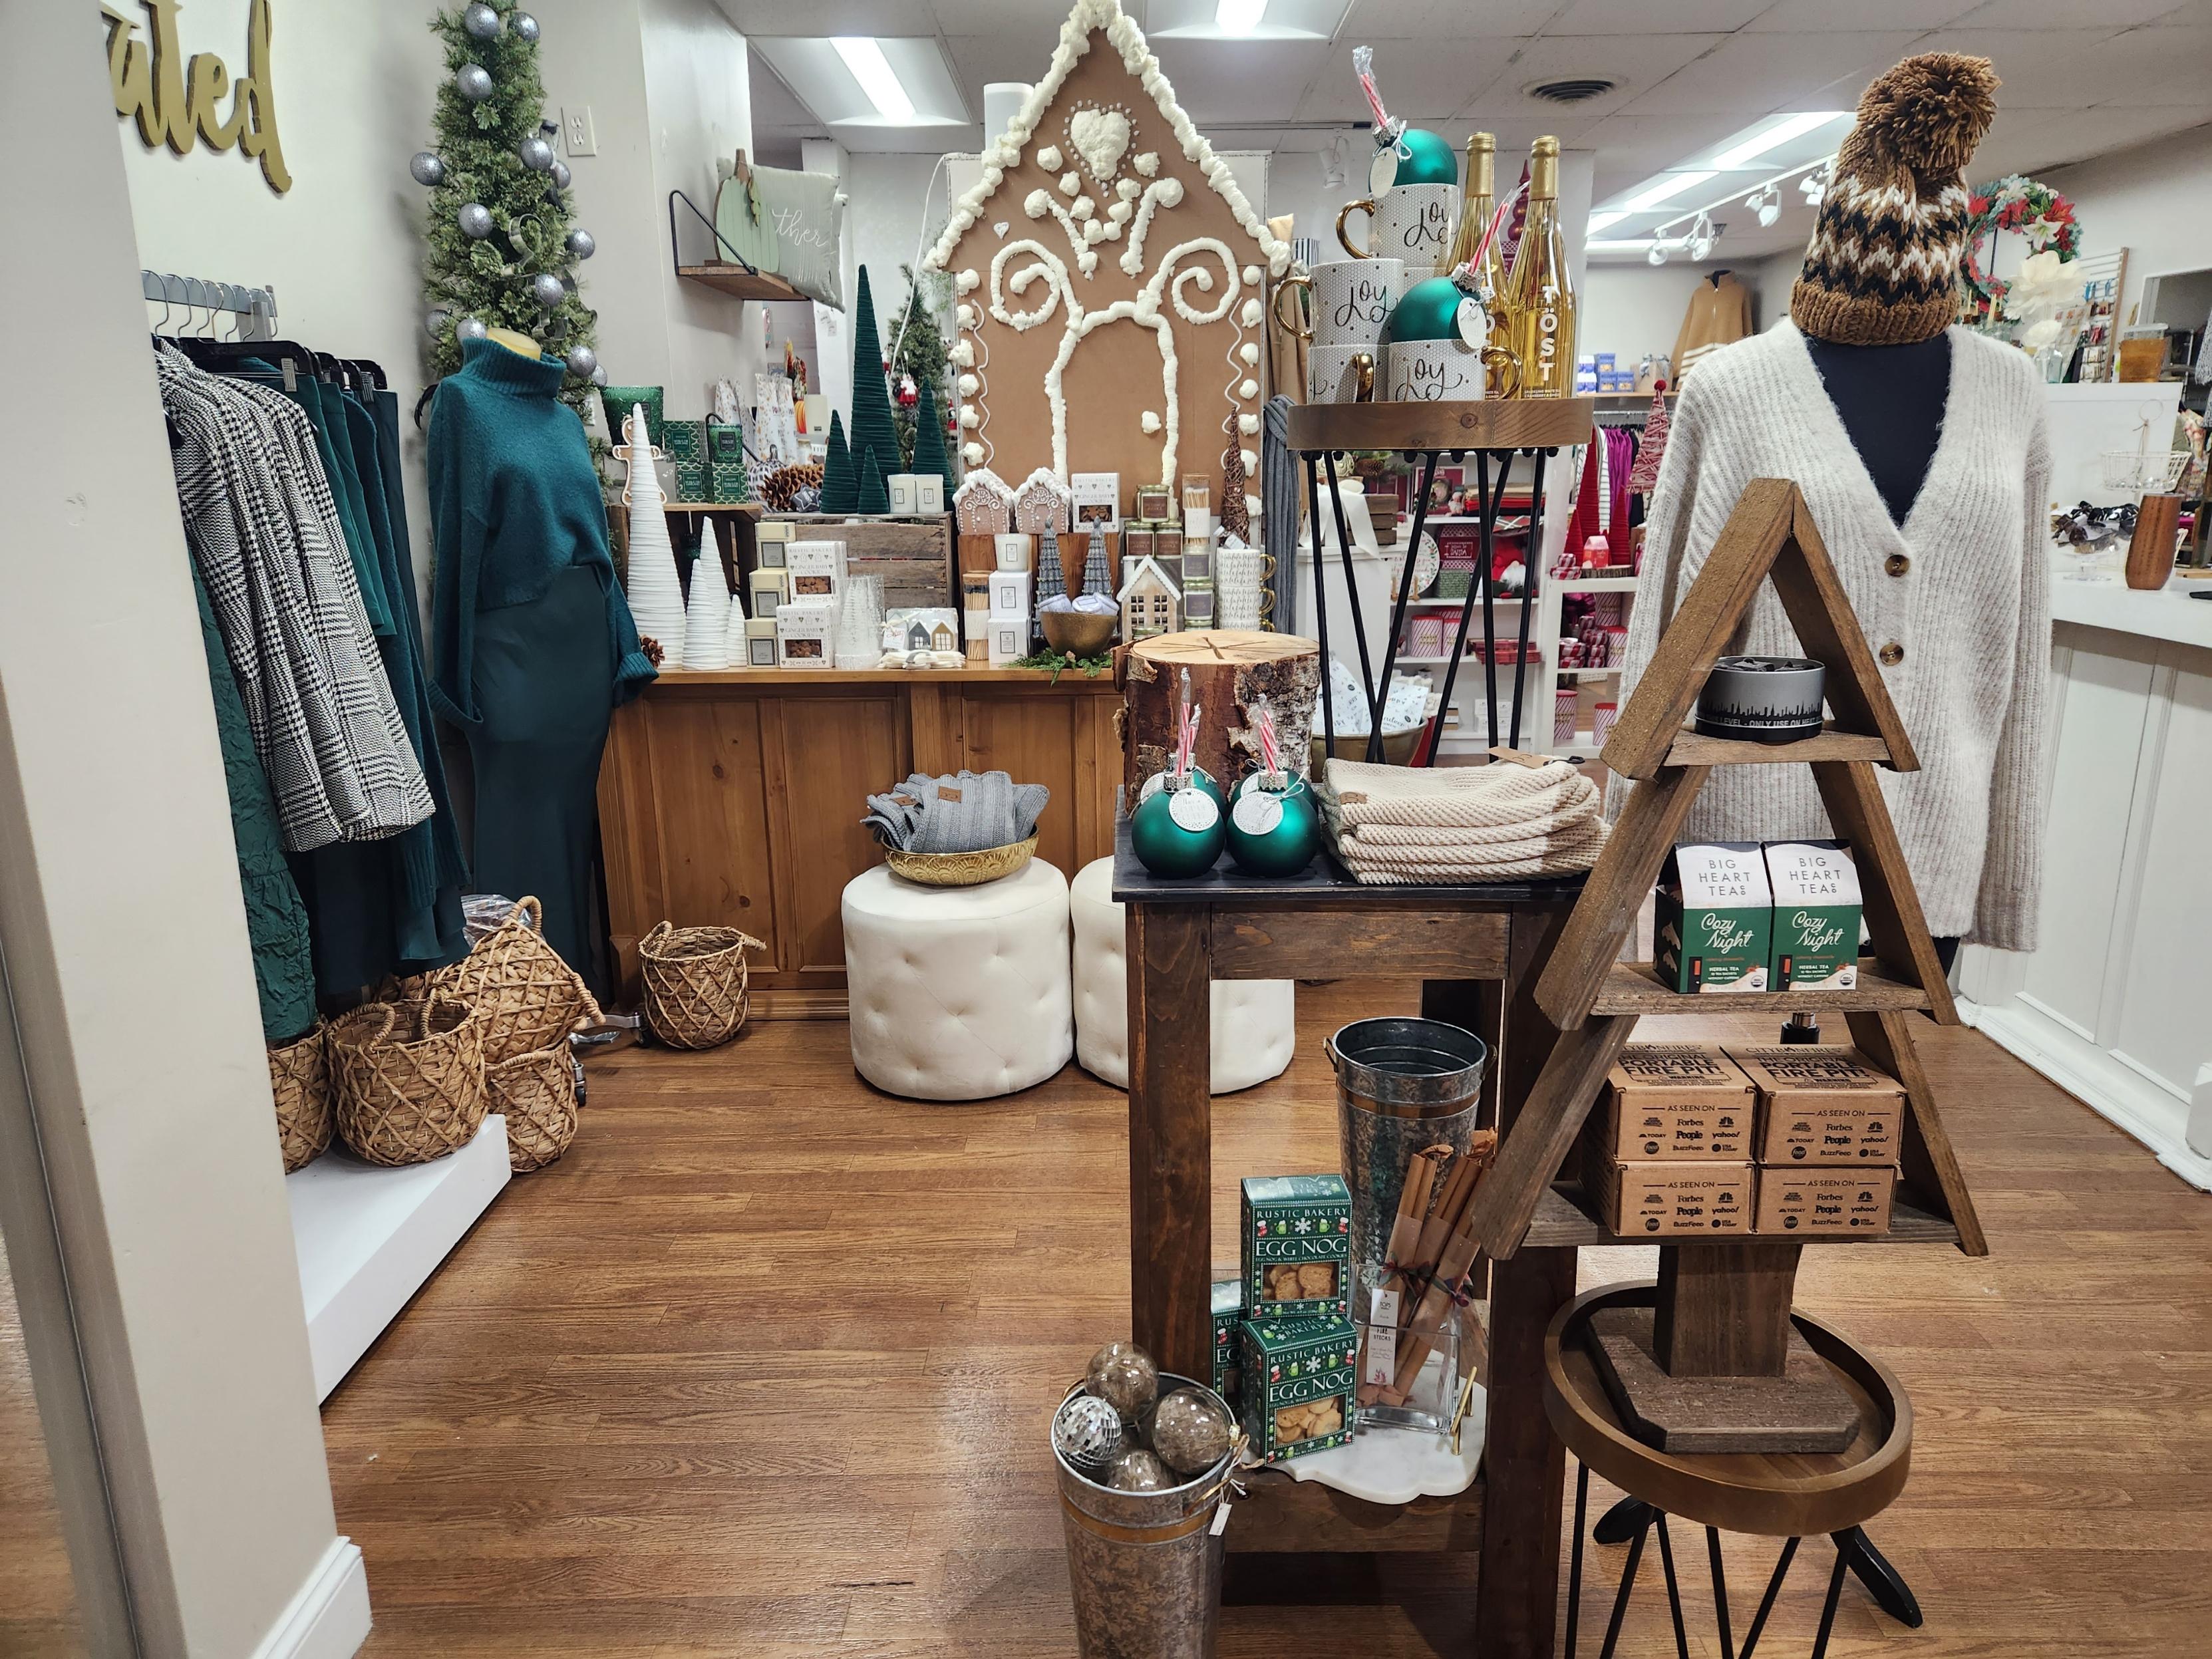 The holiday display and inside the store at Cultivated.